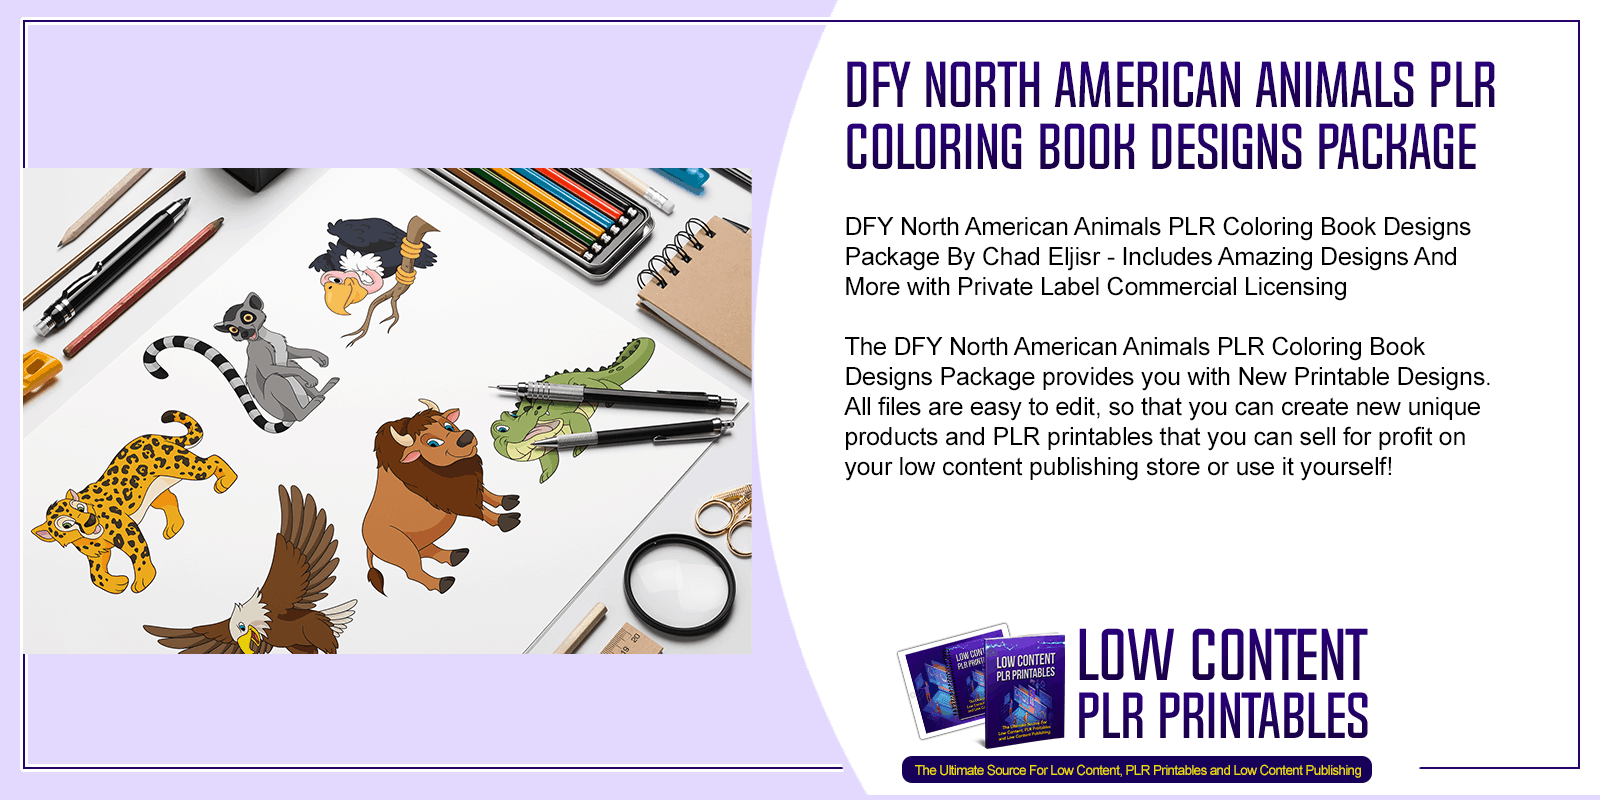 DFY North American Animals PLR Coloring Book Designs Package